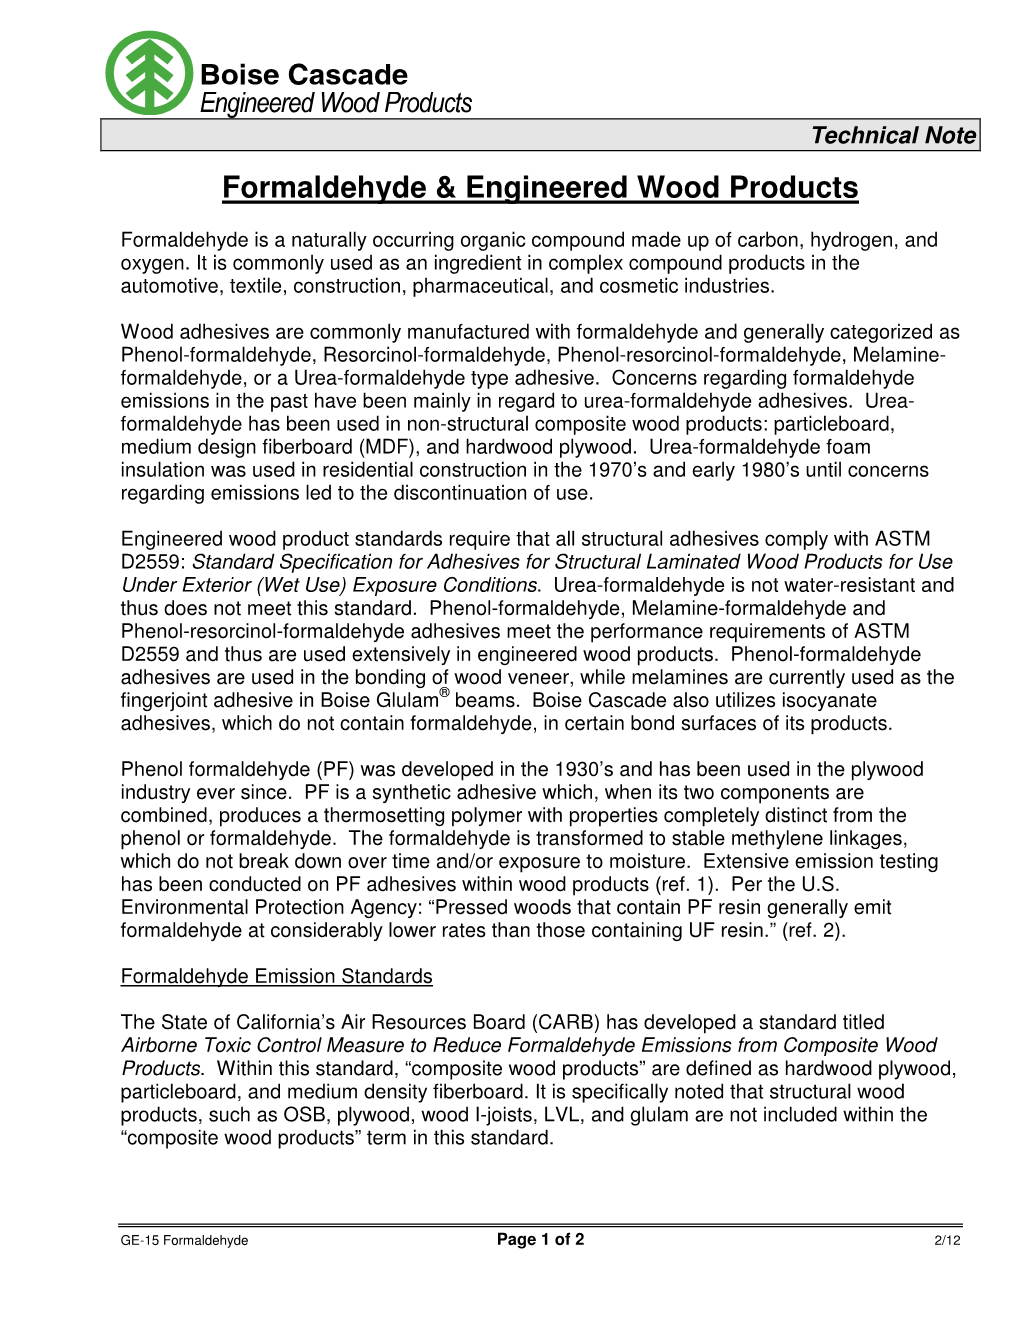 Formaldehyde & Engineered Wood Products